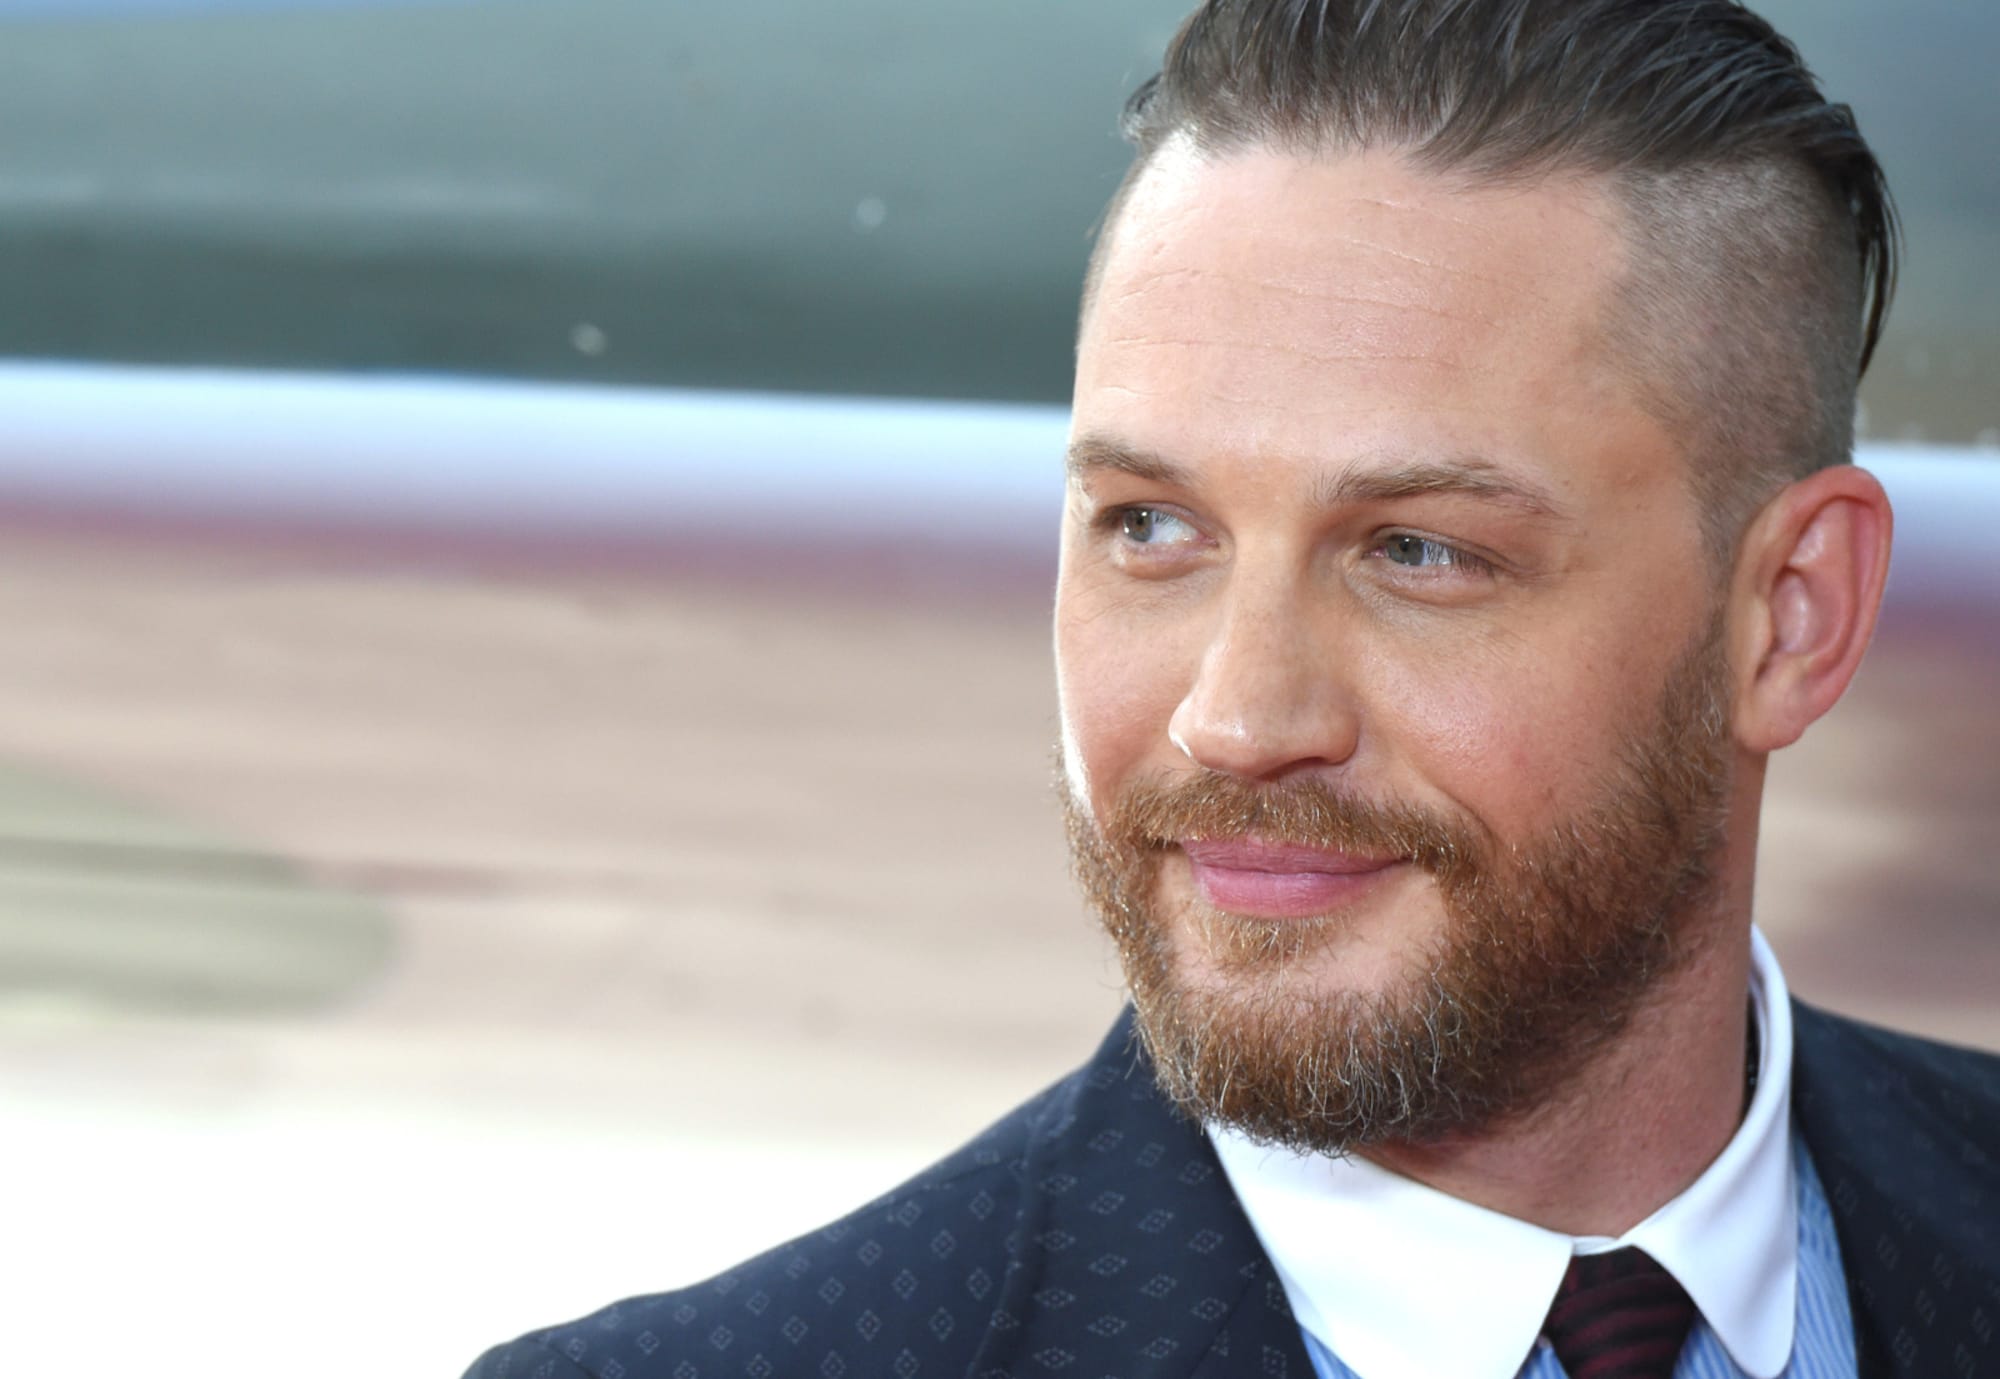 Havoc starring Tom Hardy release date, cast, synopsis, trailer, and more